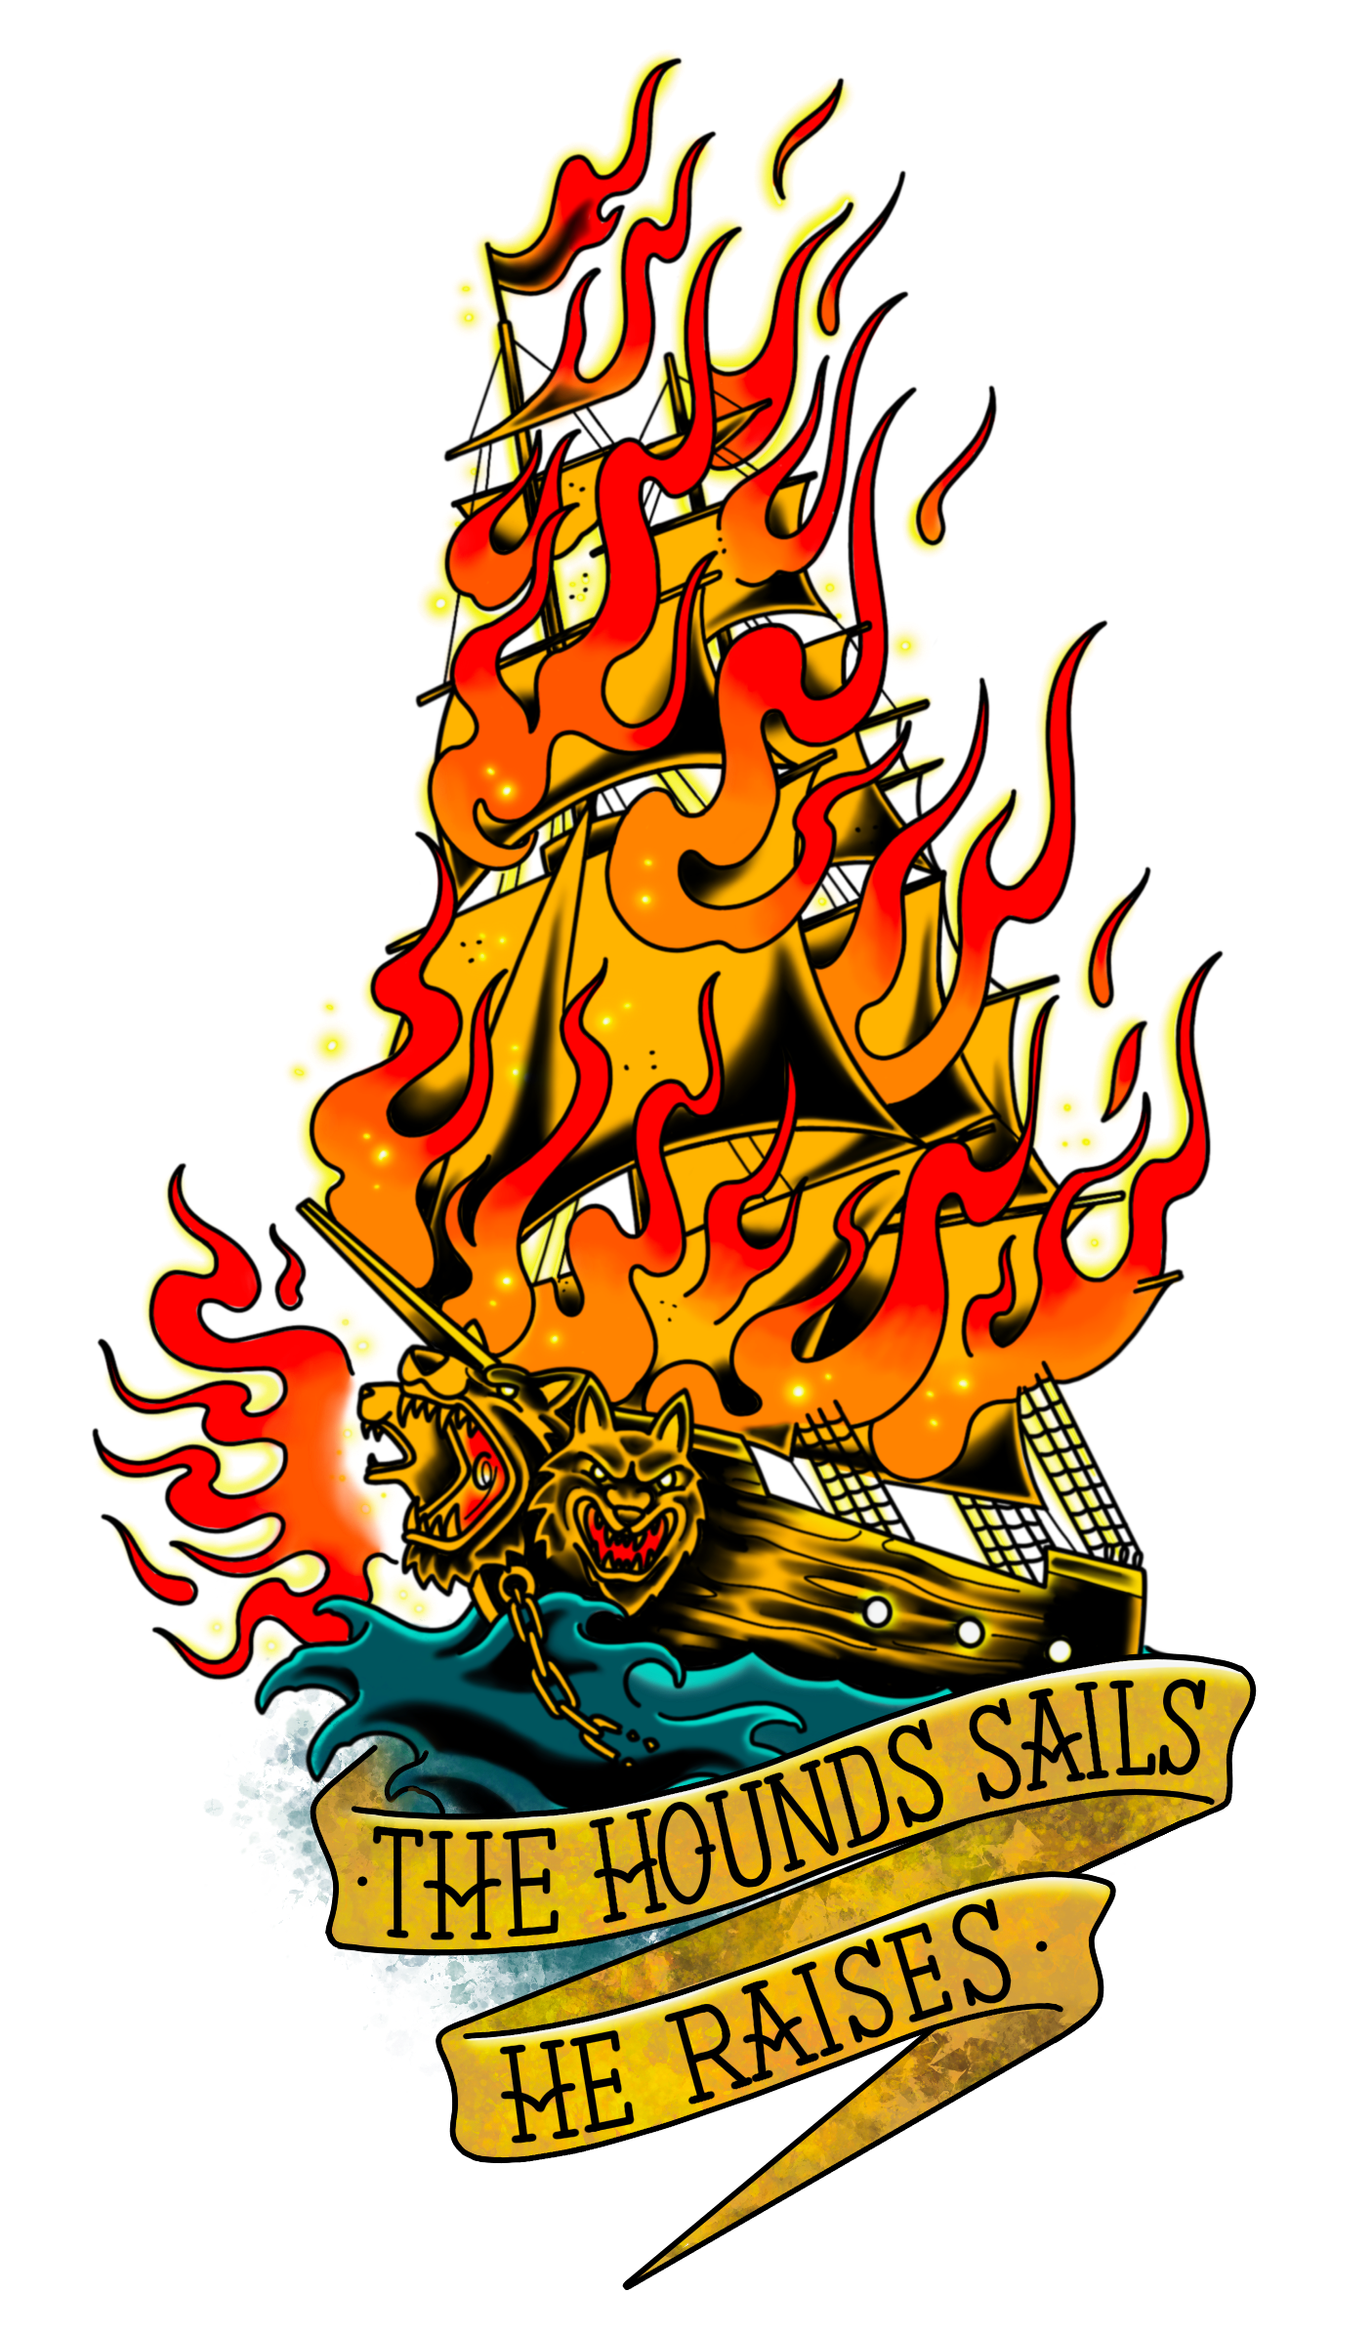 A ship with flaming sails and a three-headed hound figurehead on the sea. A banner below reads, "The Hounds Sails He Raises". All artwork done in the American traditional tattoo style.